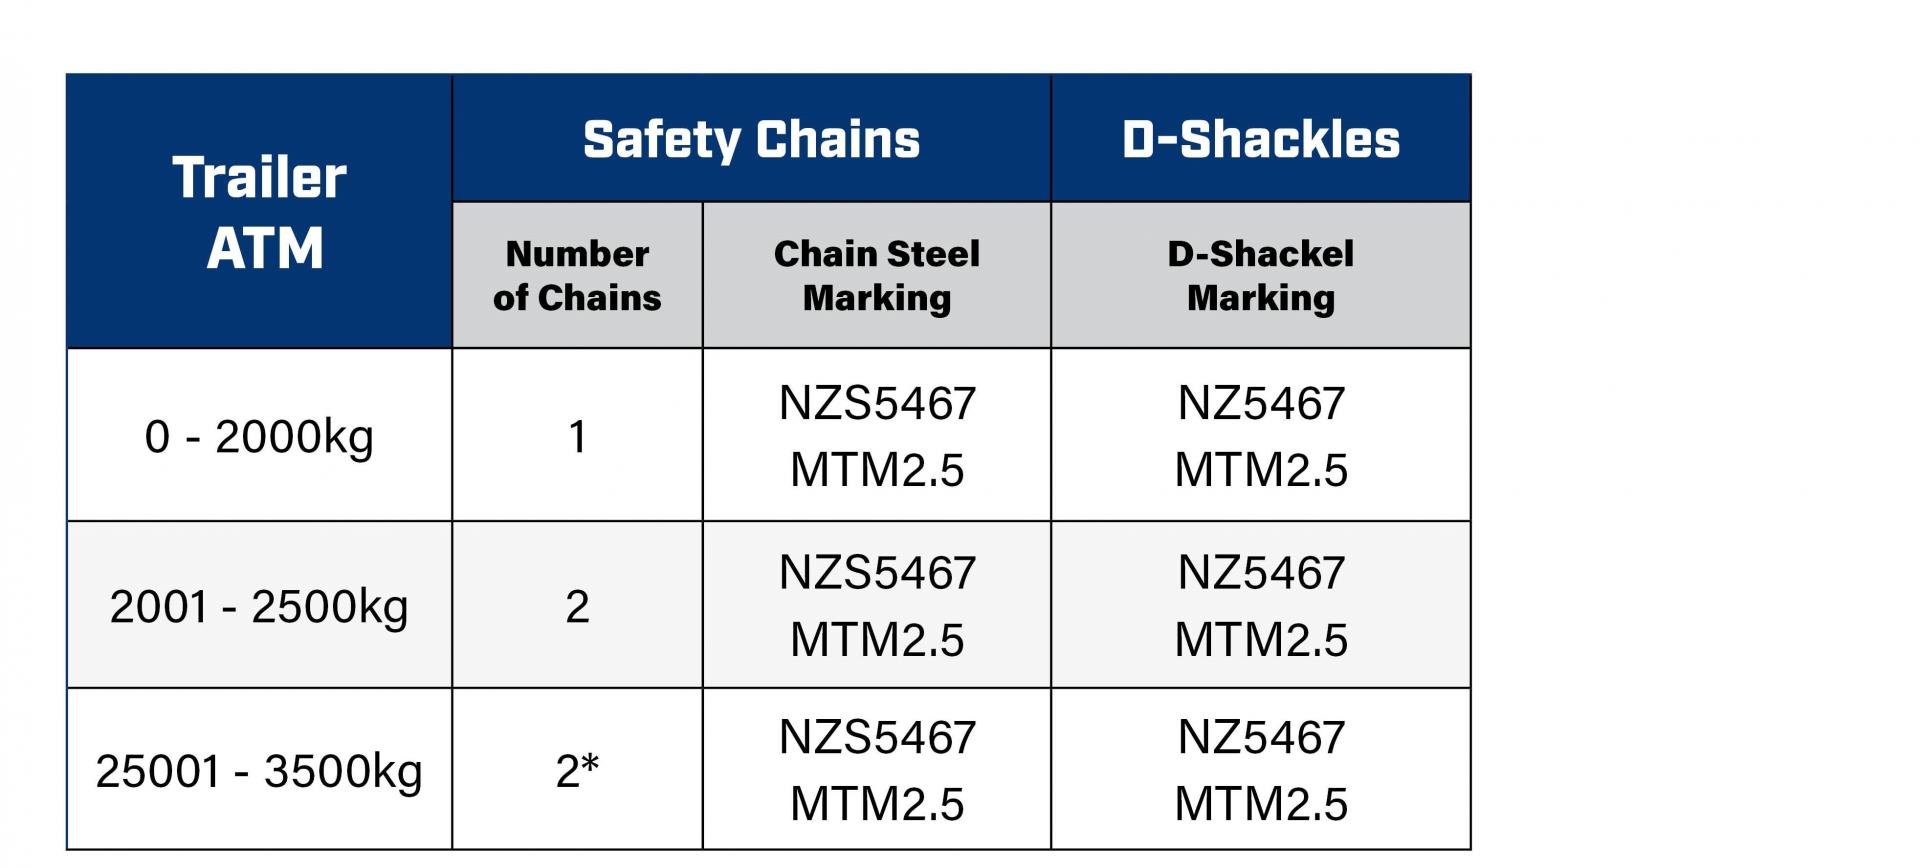 * For 2,501-3,500kg trailers, a breakaway system is the preferred method of safety mechanism. However, 2 x chains are a legally acceptable option.  